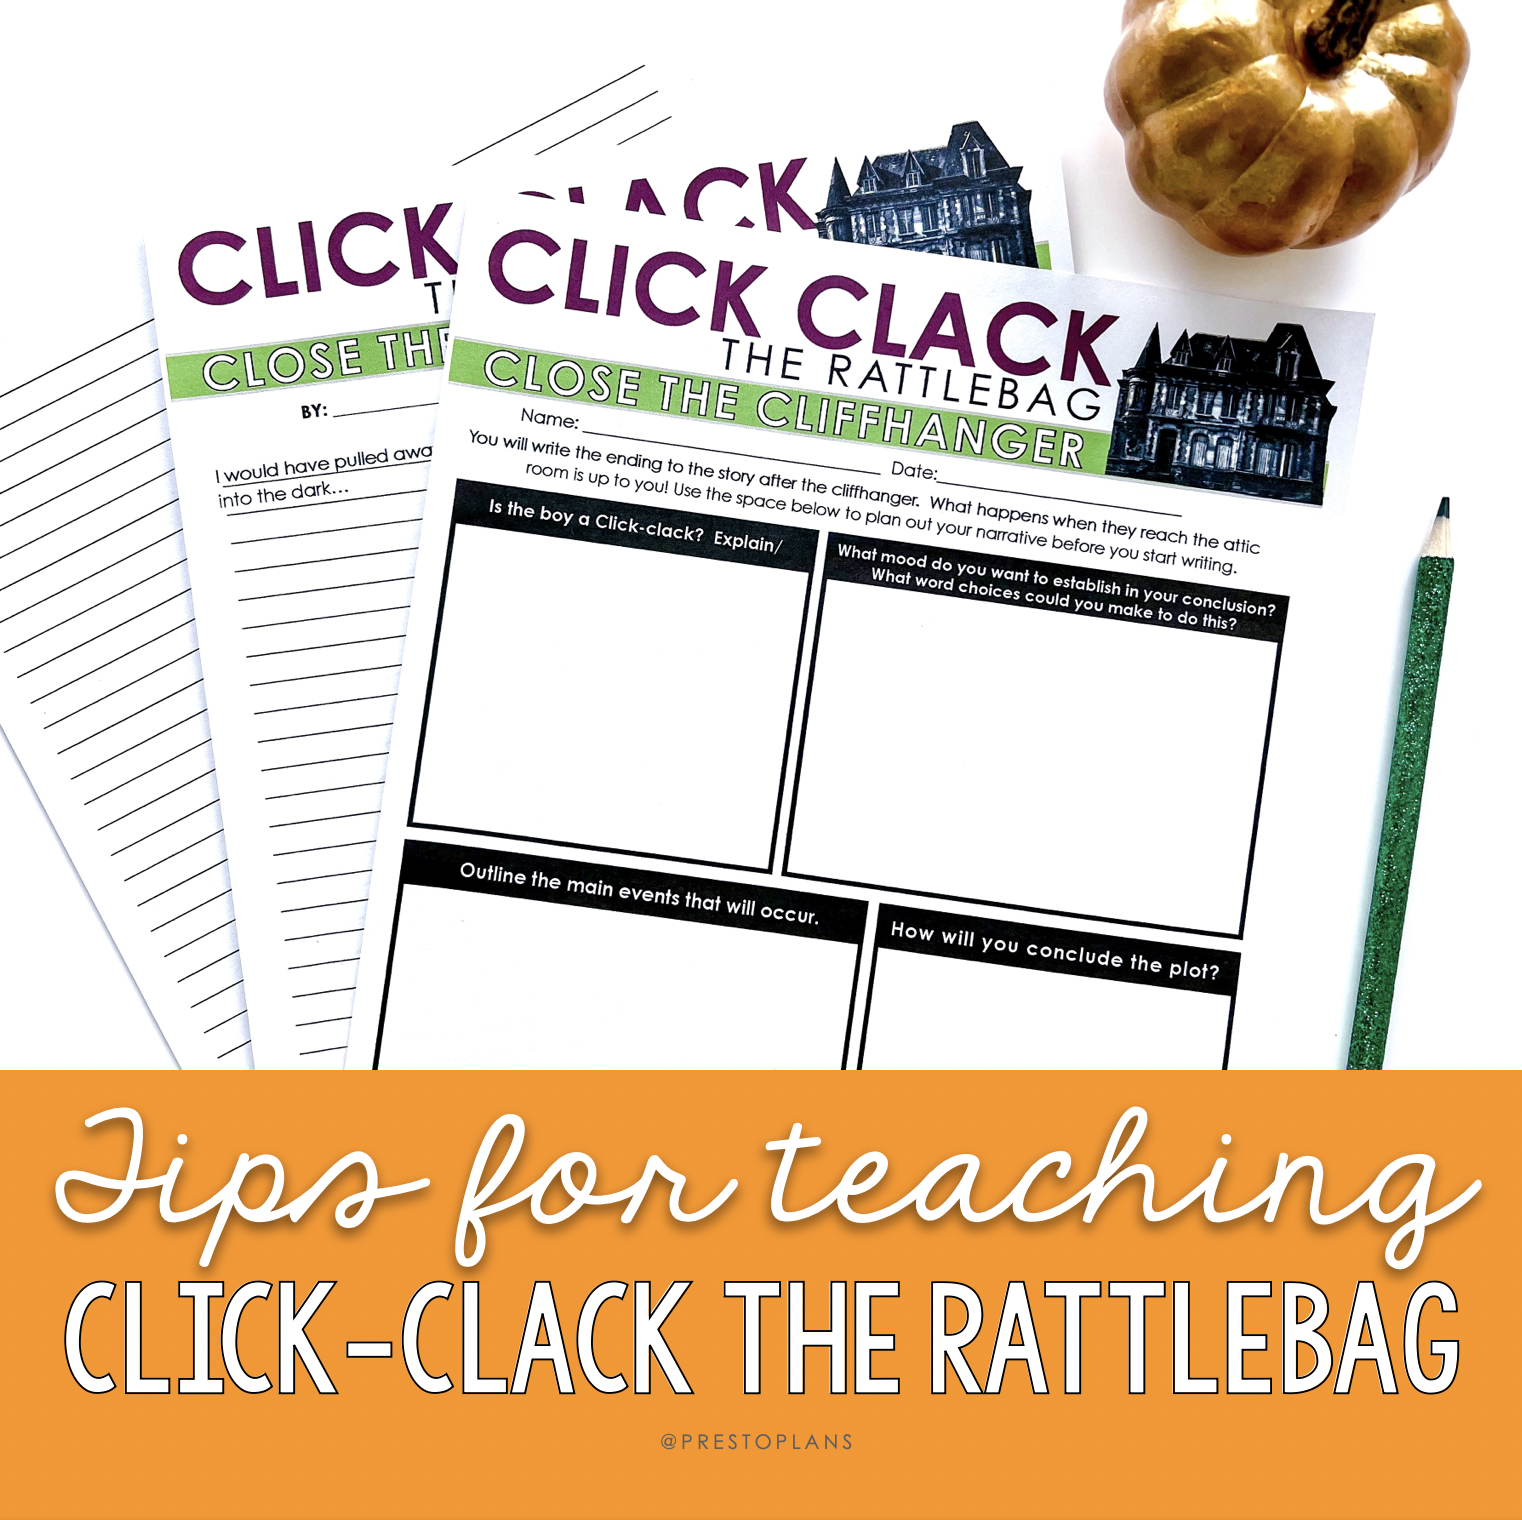 Tips for teaching "Click-Clack the Rattlebag" by Neil Gaiman